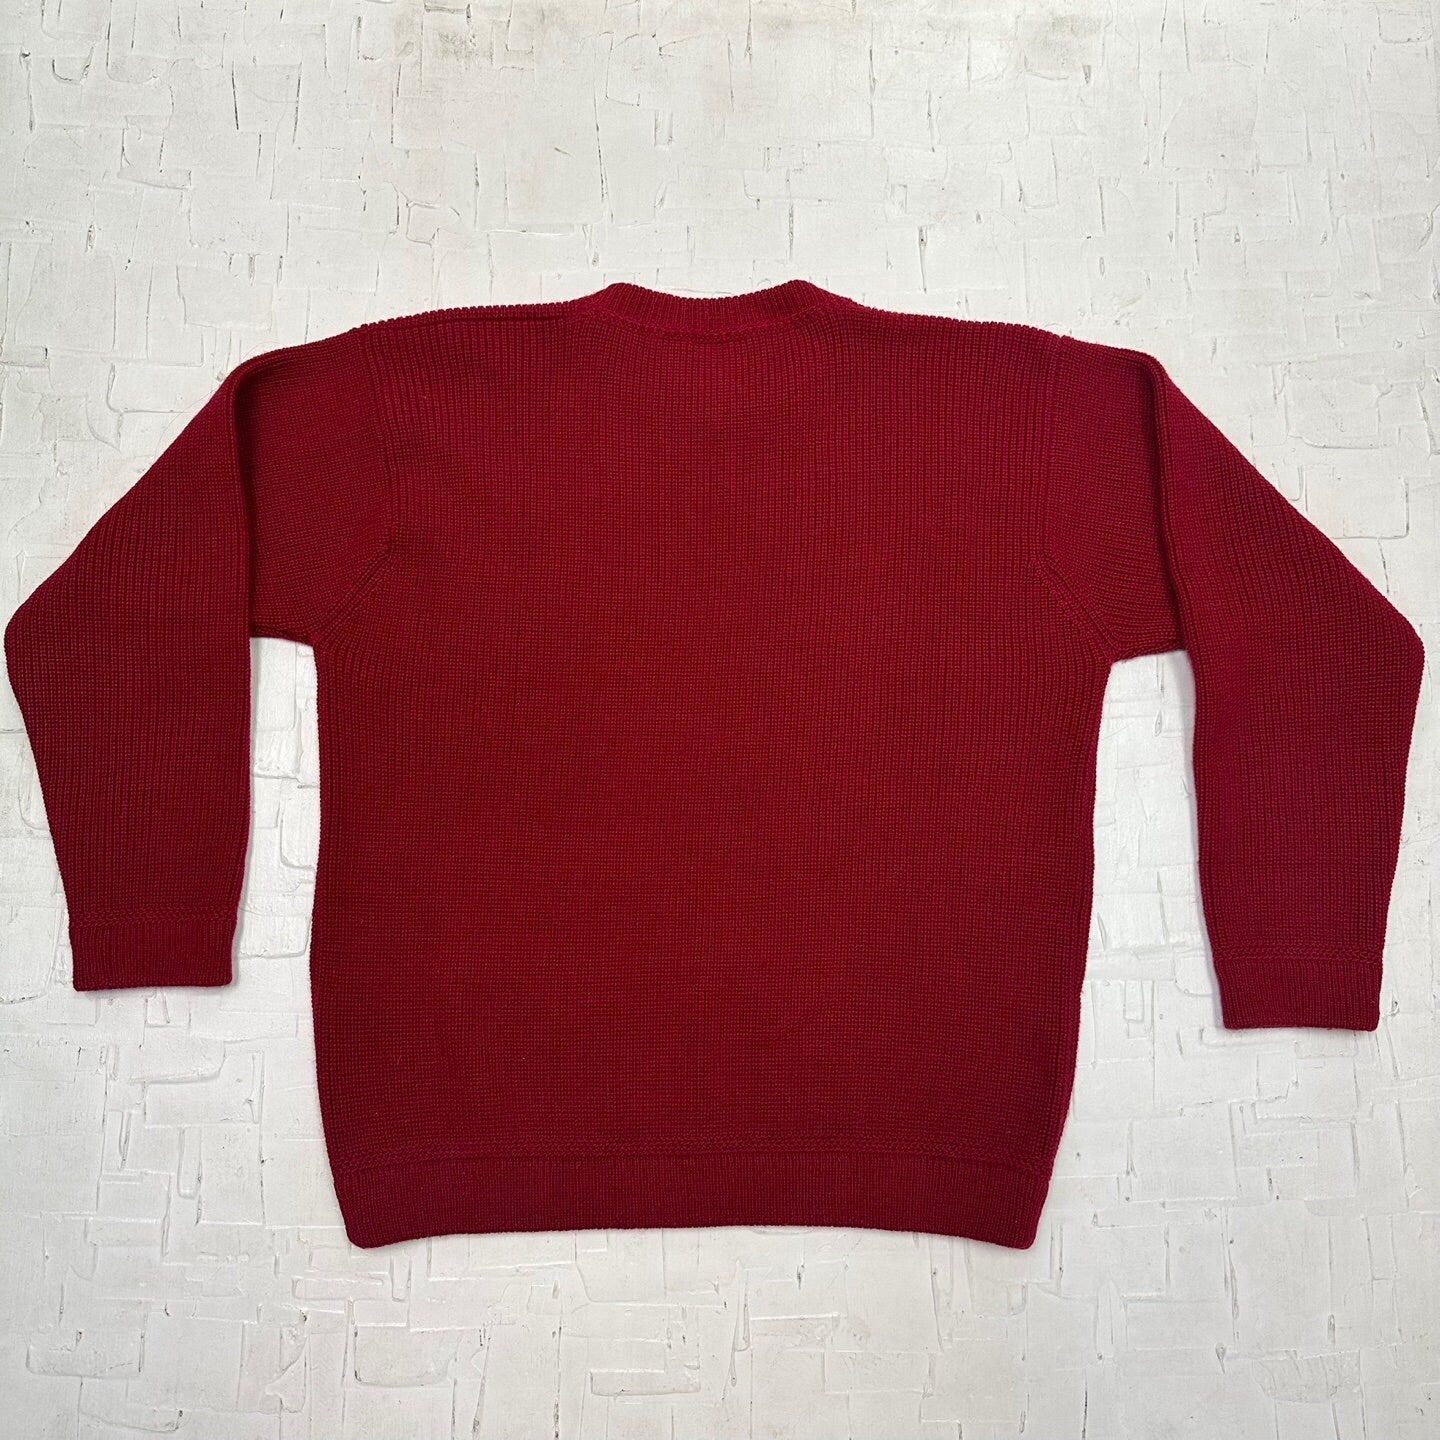 Vintage Patagonia Red Cable Knit Oversized Sweater | Vintage Knit Sweater | Patagonia Knitwear | Vintage Knitwear | Size L | SKU-2065 |